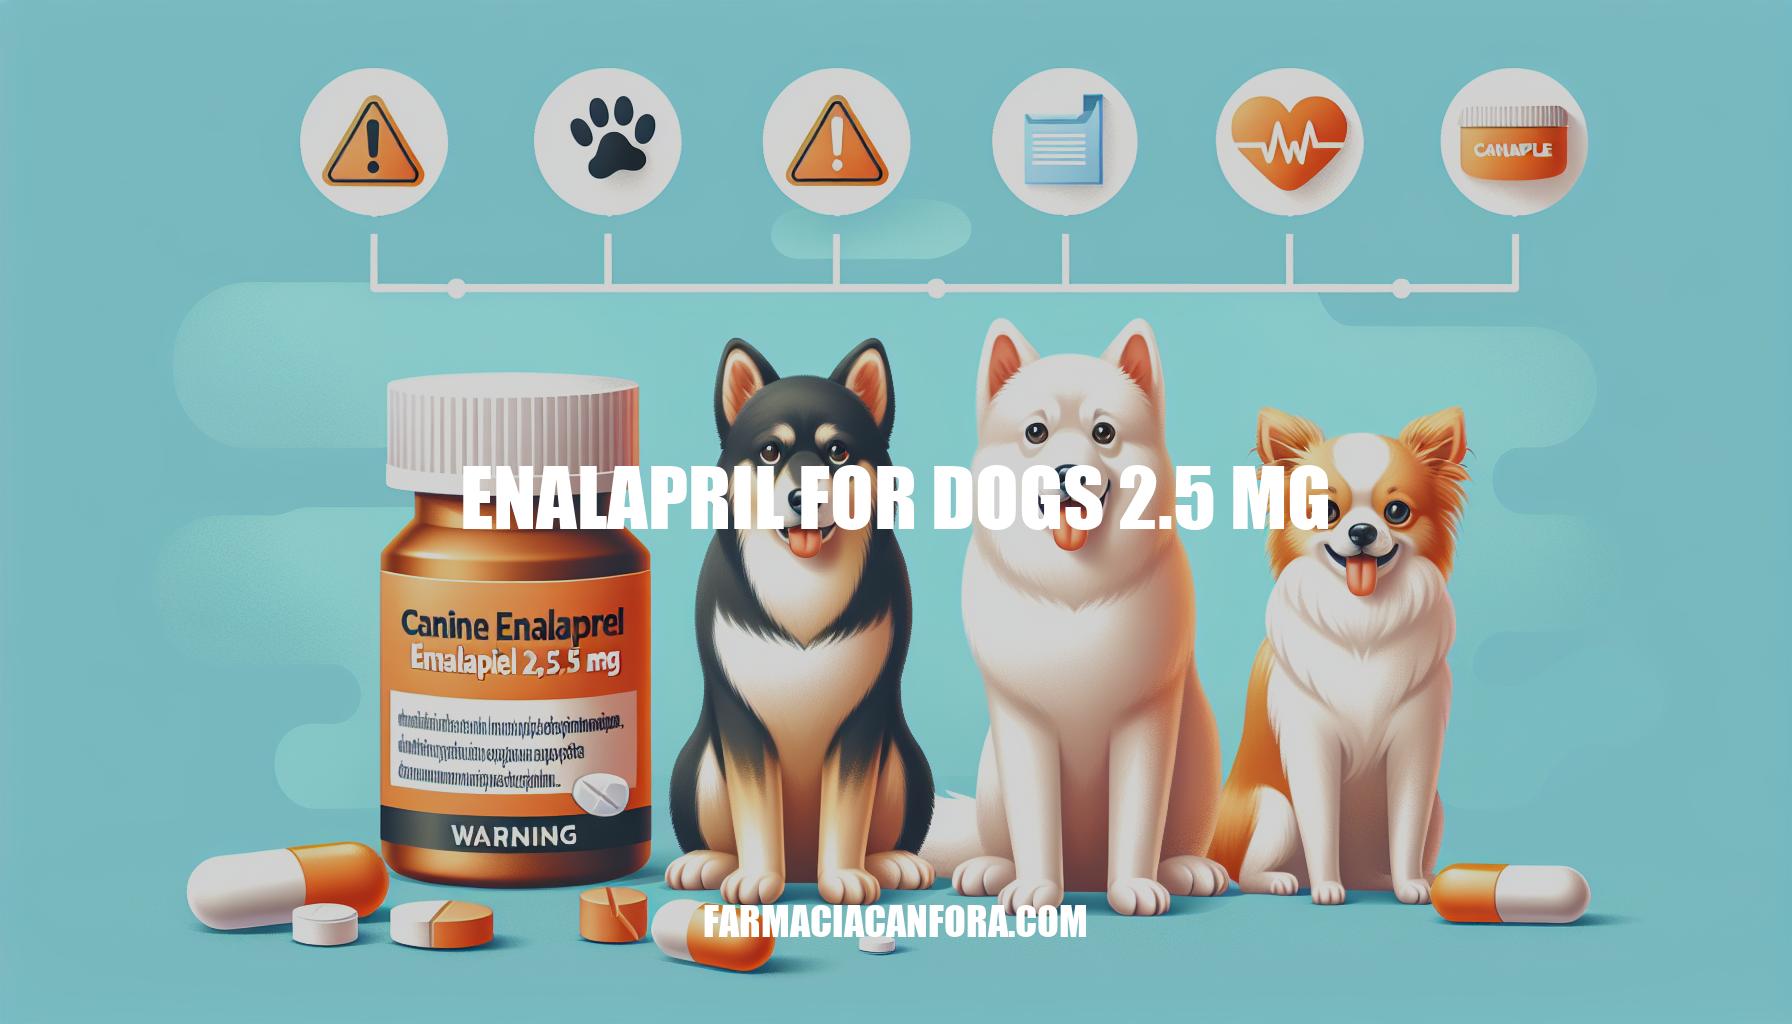 Enalapril for Dogs 2.5 mg: Benefits, Dosage & Side Effects